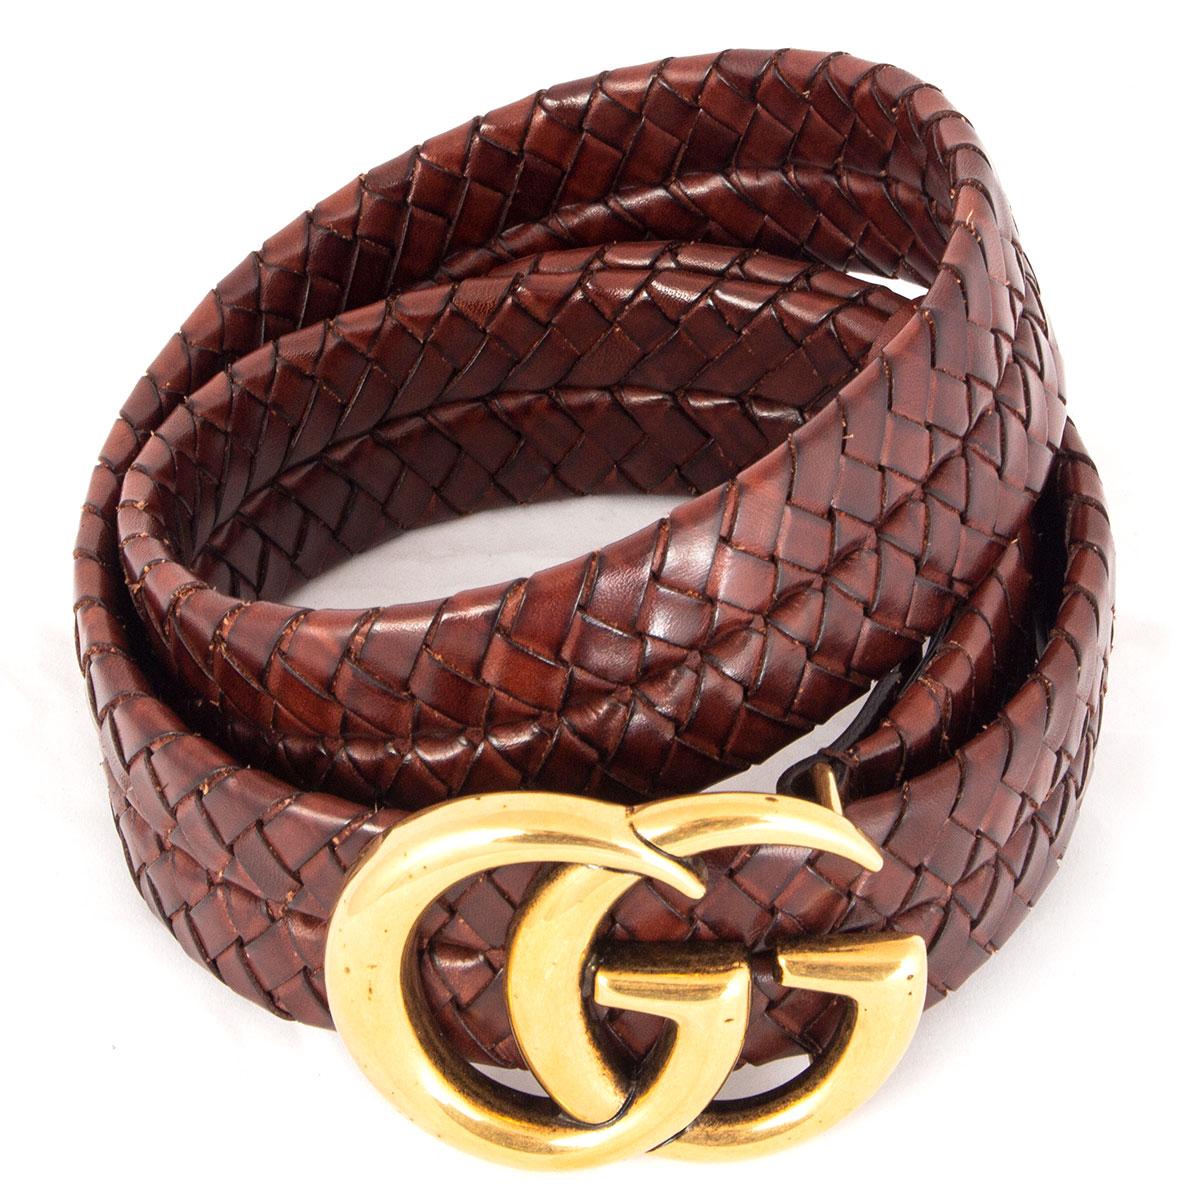 100% authentic Gucci braided GG belt in brown leather featuring antique gold-tone hardware. Has been worn and is in excellent condition. 

Measurements
Tag Size	80
Size	80cm (31.2in)
Width	4cm (1.6in)
Length	104cm (40.6in)
Buckle Size Height	6cm